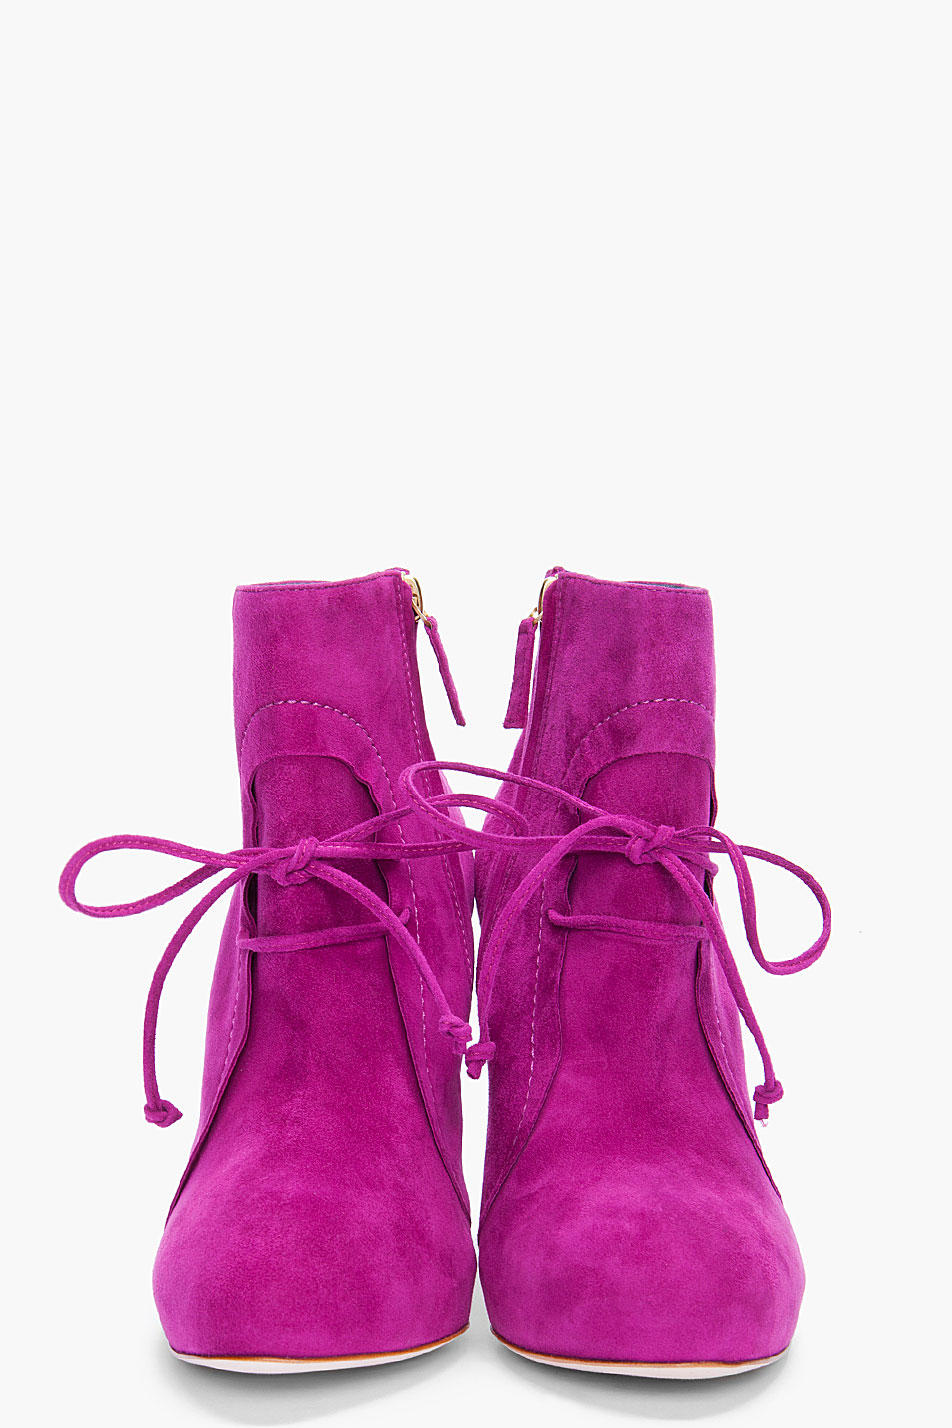 Rupert Sanderson Fuchsia Osprey Suede Ankle Boots in Pink - Lyst